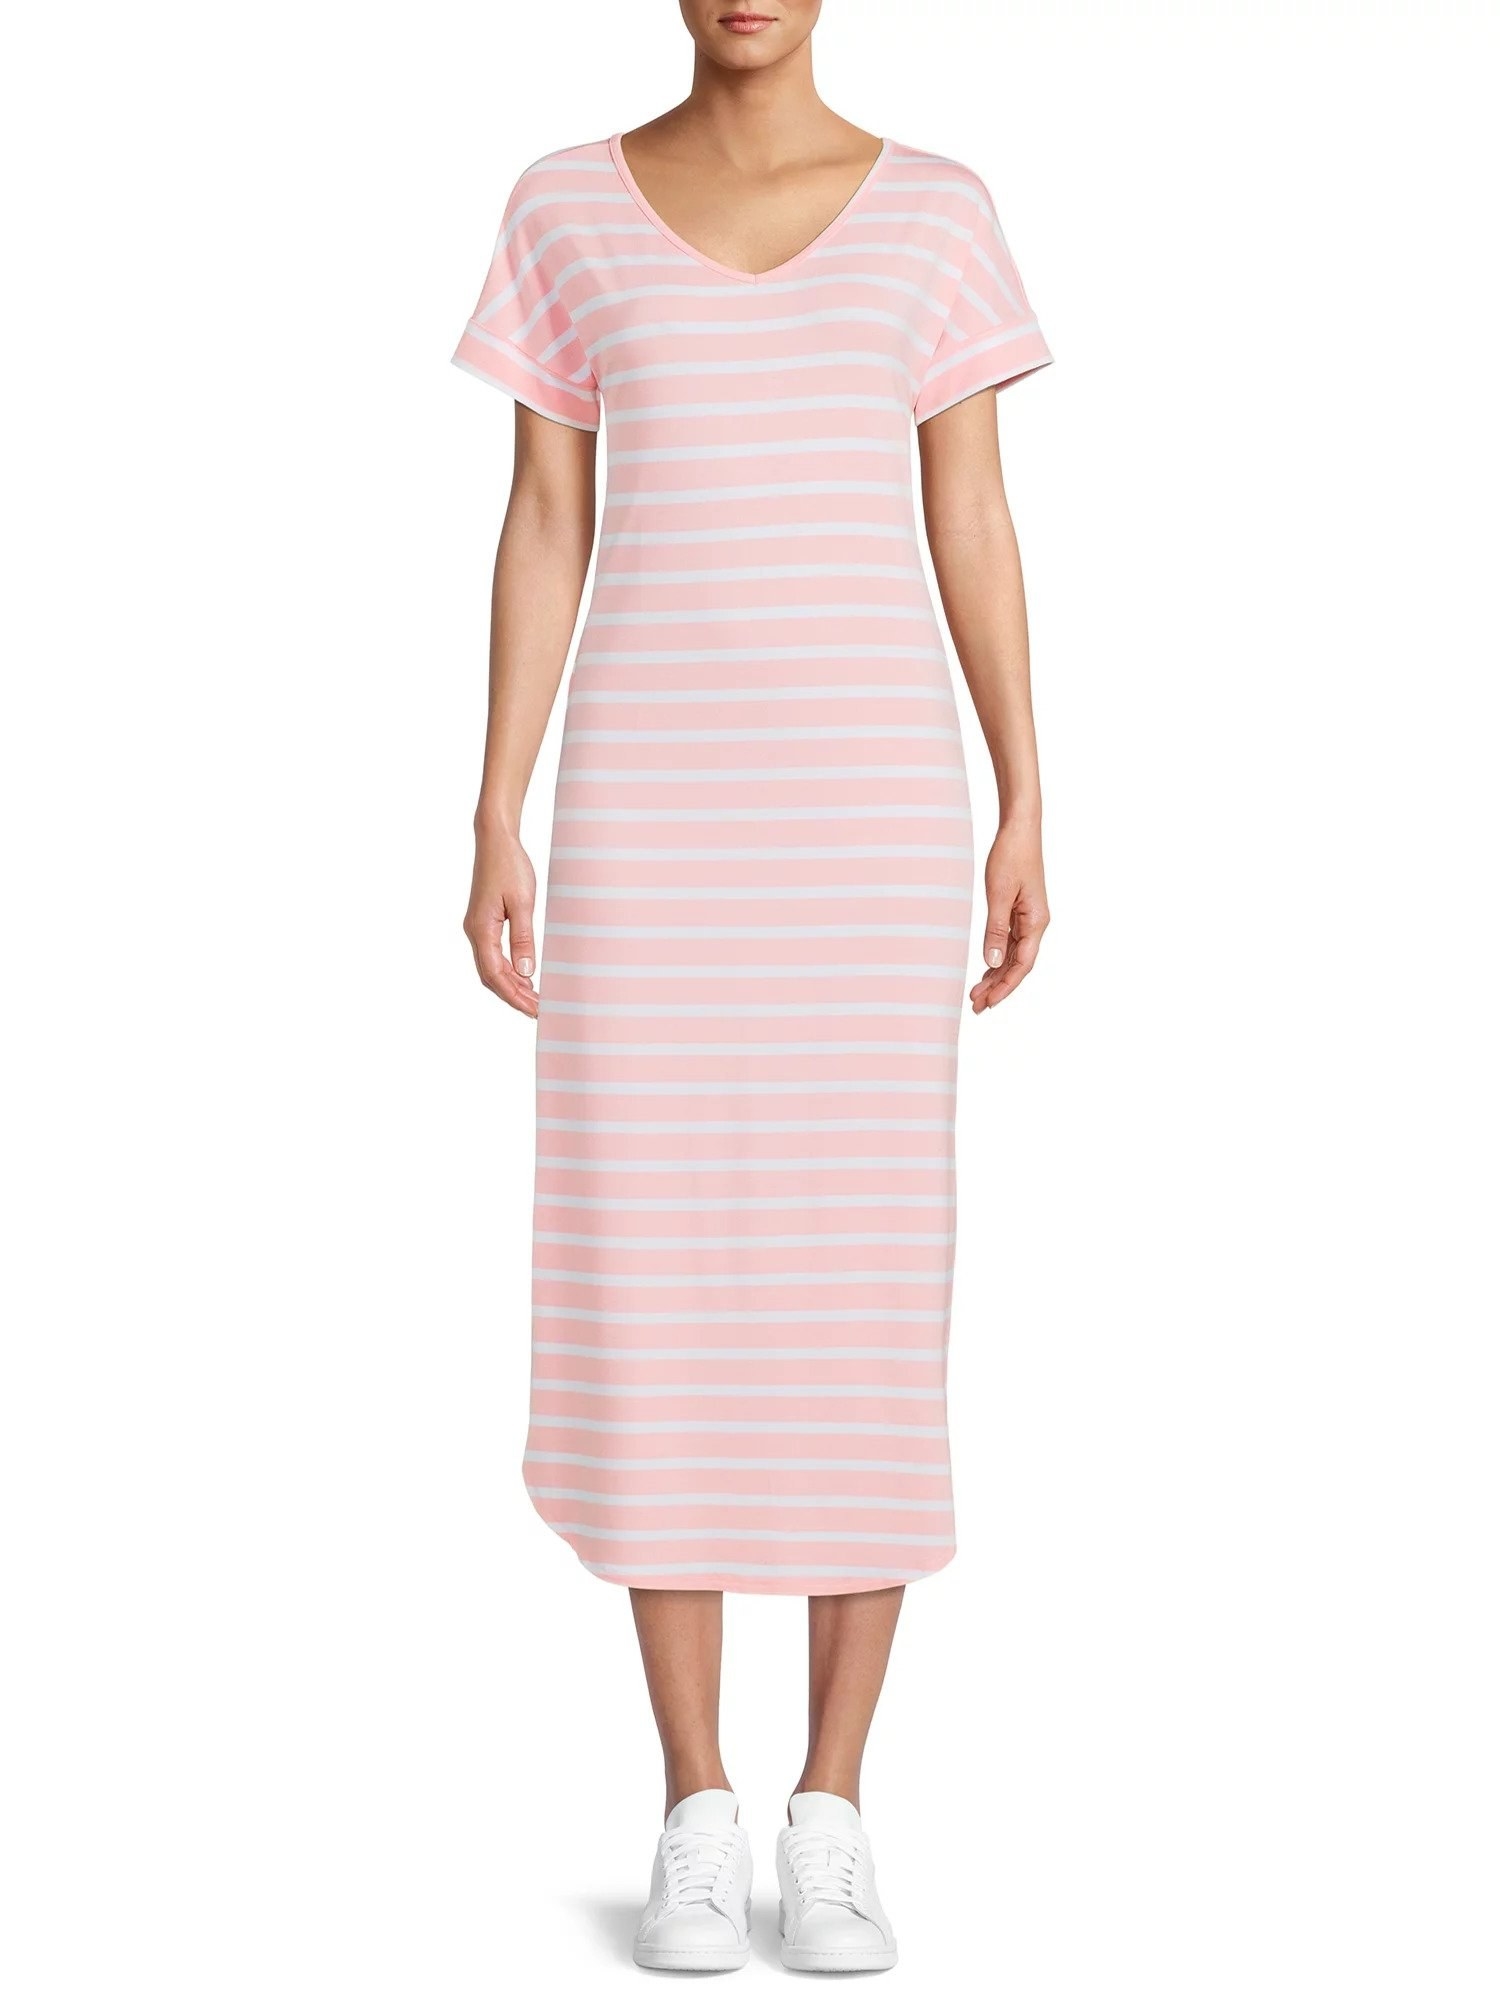 model wearing pink and white striped v-neck maxi dress